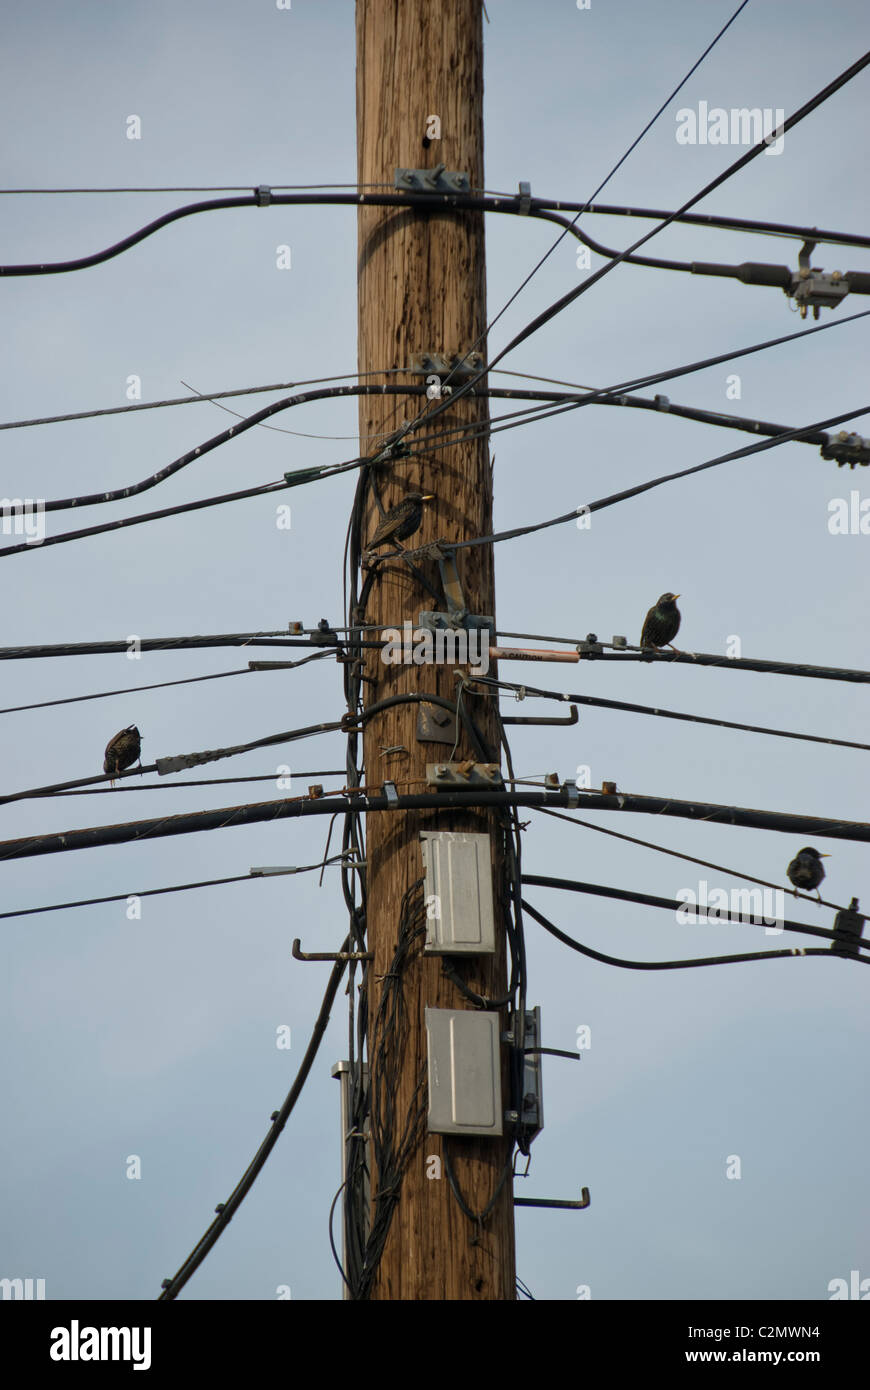 Birds sitting on overhead power lines with messy bundles of electrical cables hanging on a utility pole. Long Island,  New york Stock Photo